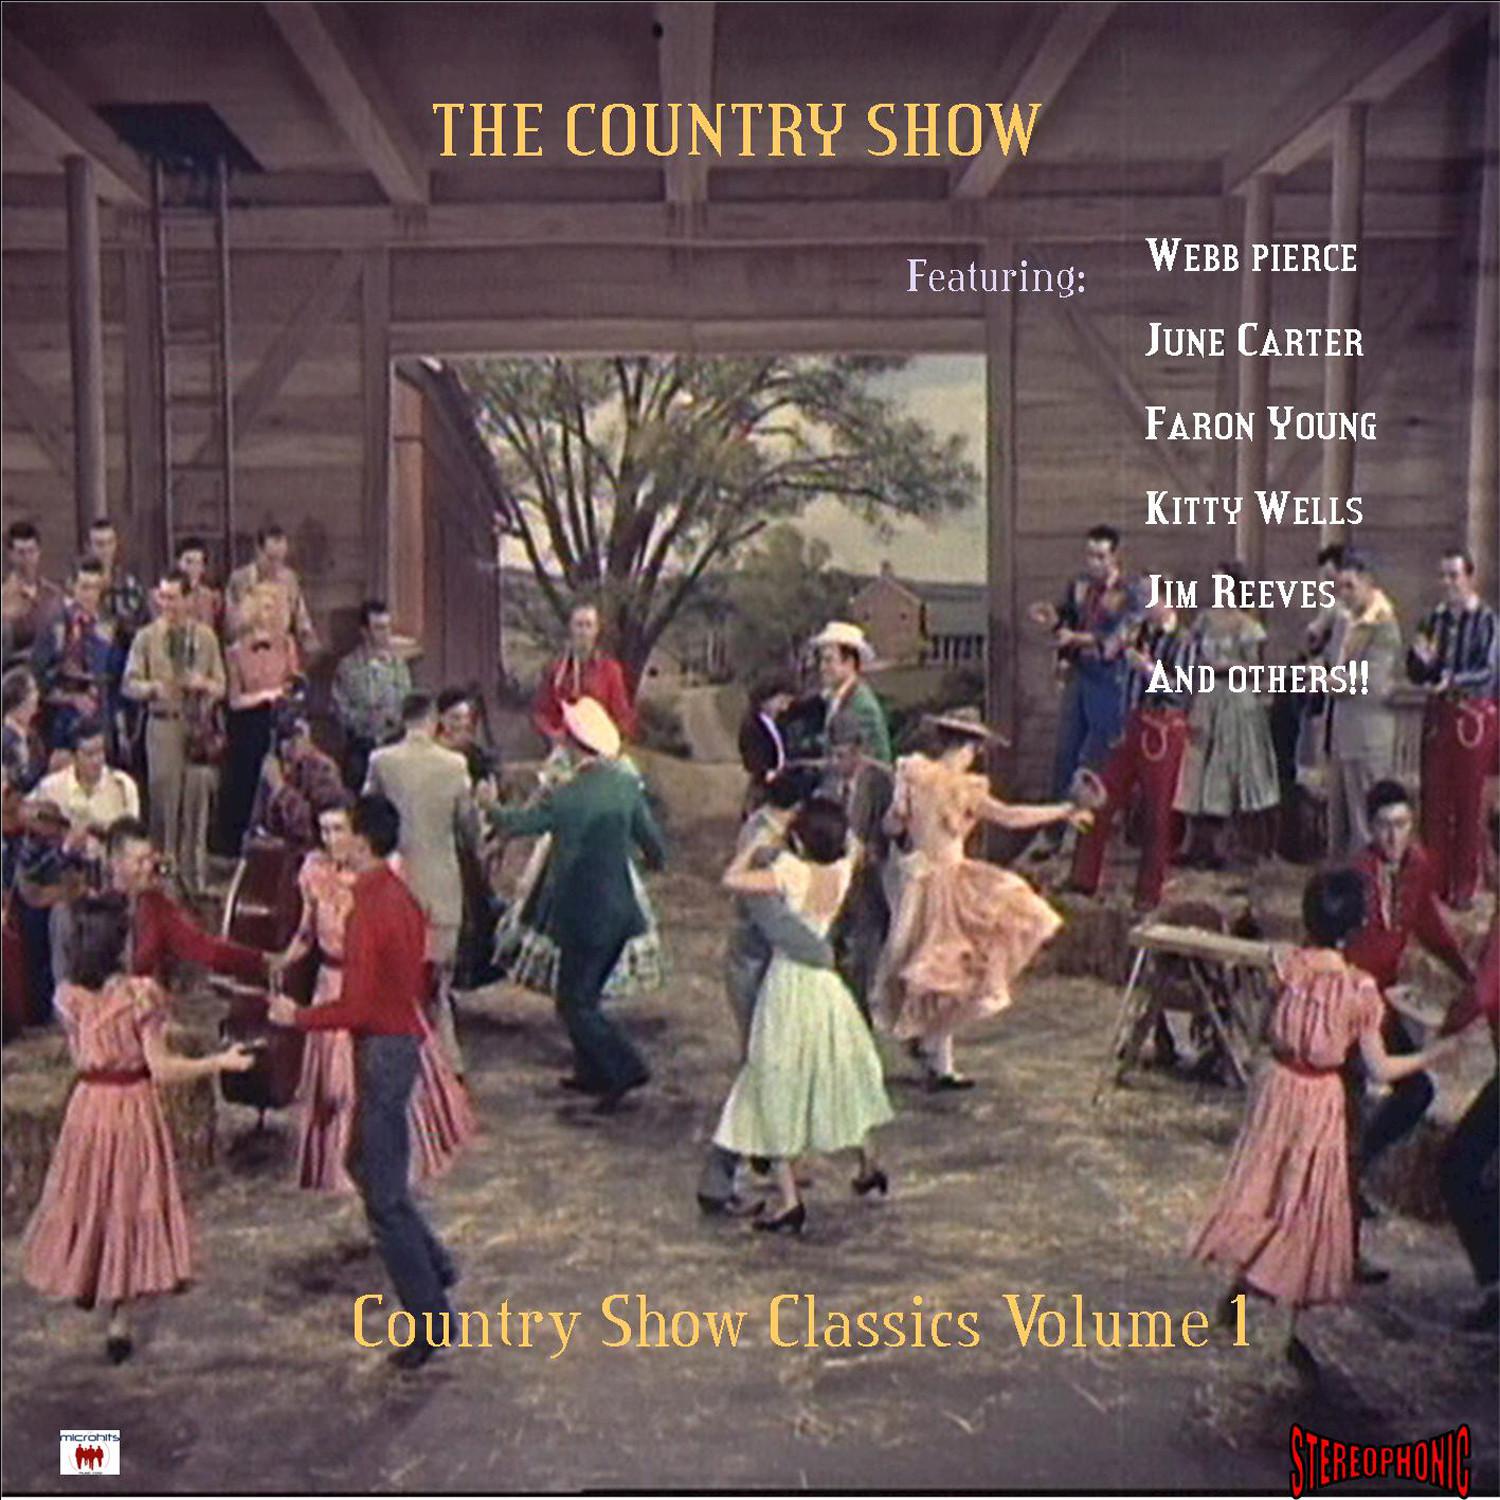 The Country Show - Country Show Classics Volume 1